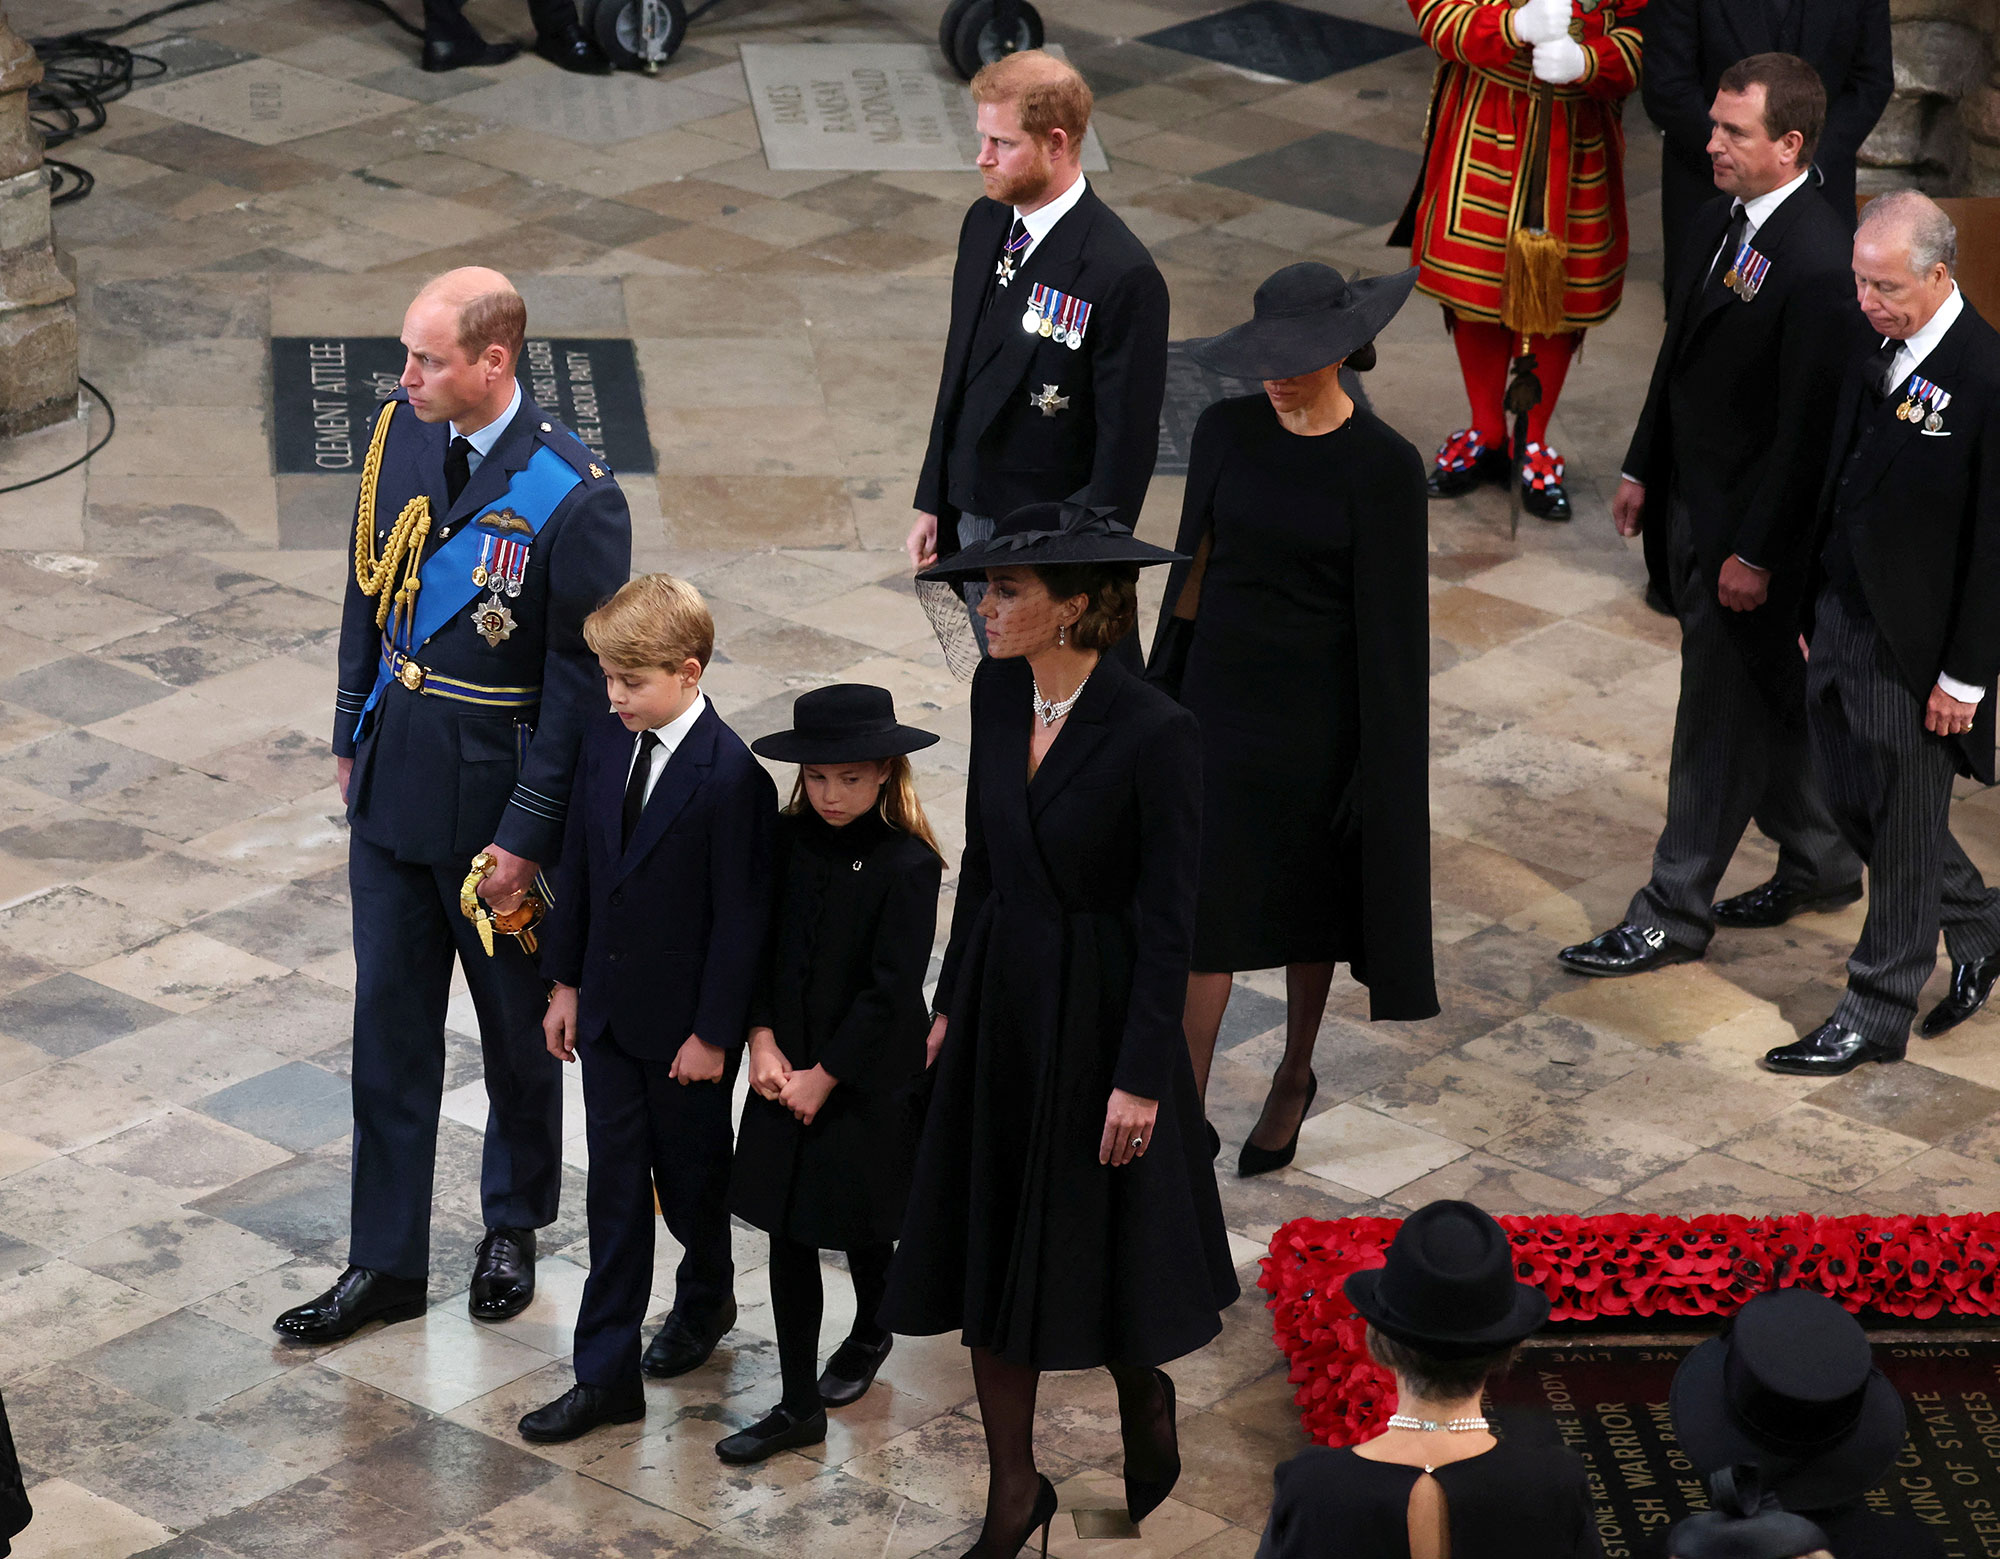 Harry Sits Between Meghan, Charlotte at St George's Chapel Service